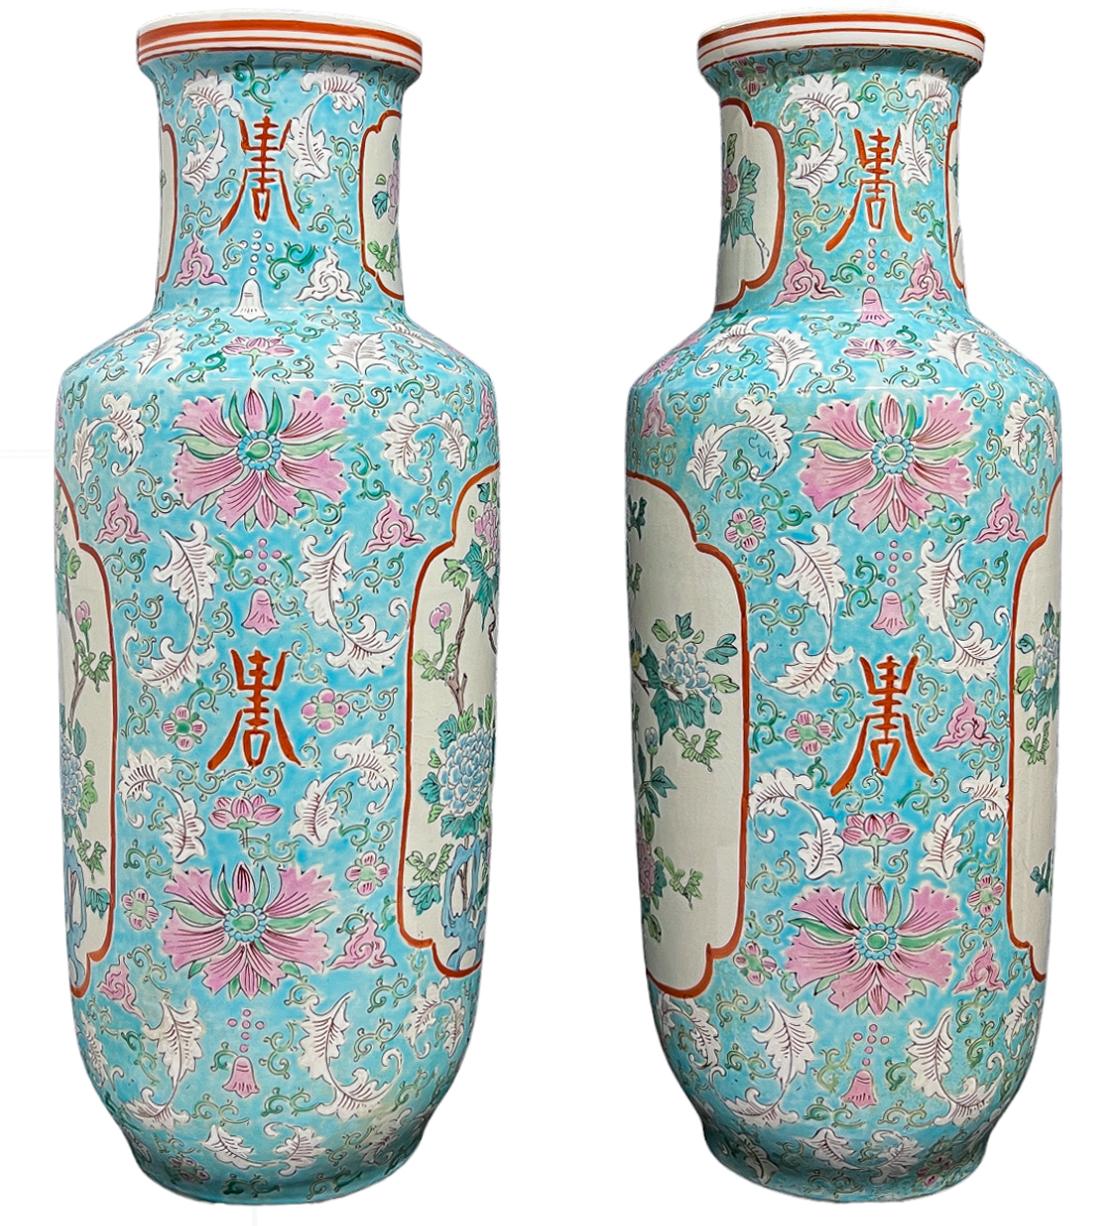 A fabulous set of large baby blue Chinese porcelain picture vases. A small blue and yellow canary is perched on a sparse blue and pink hydrangea bush. The central composition is surrounded by that dreamy light blue, pink flowers, scroll form stems